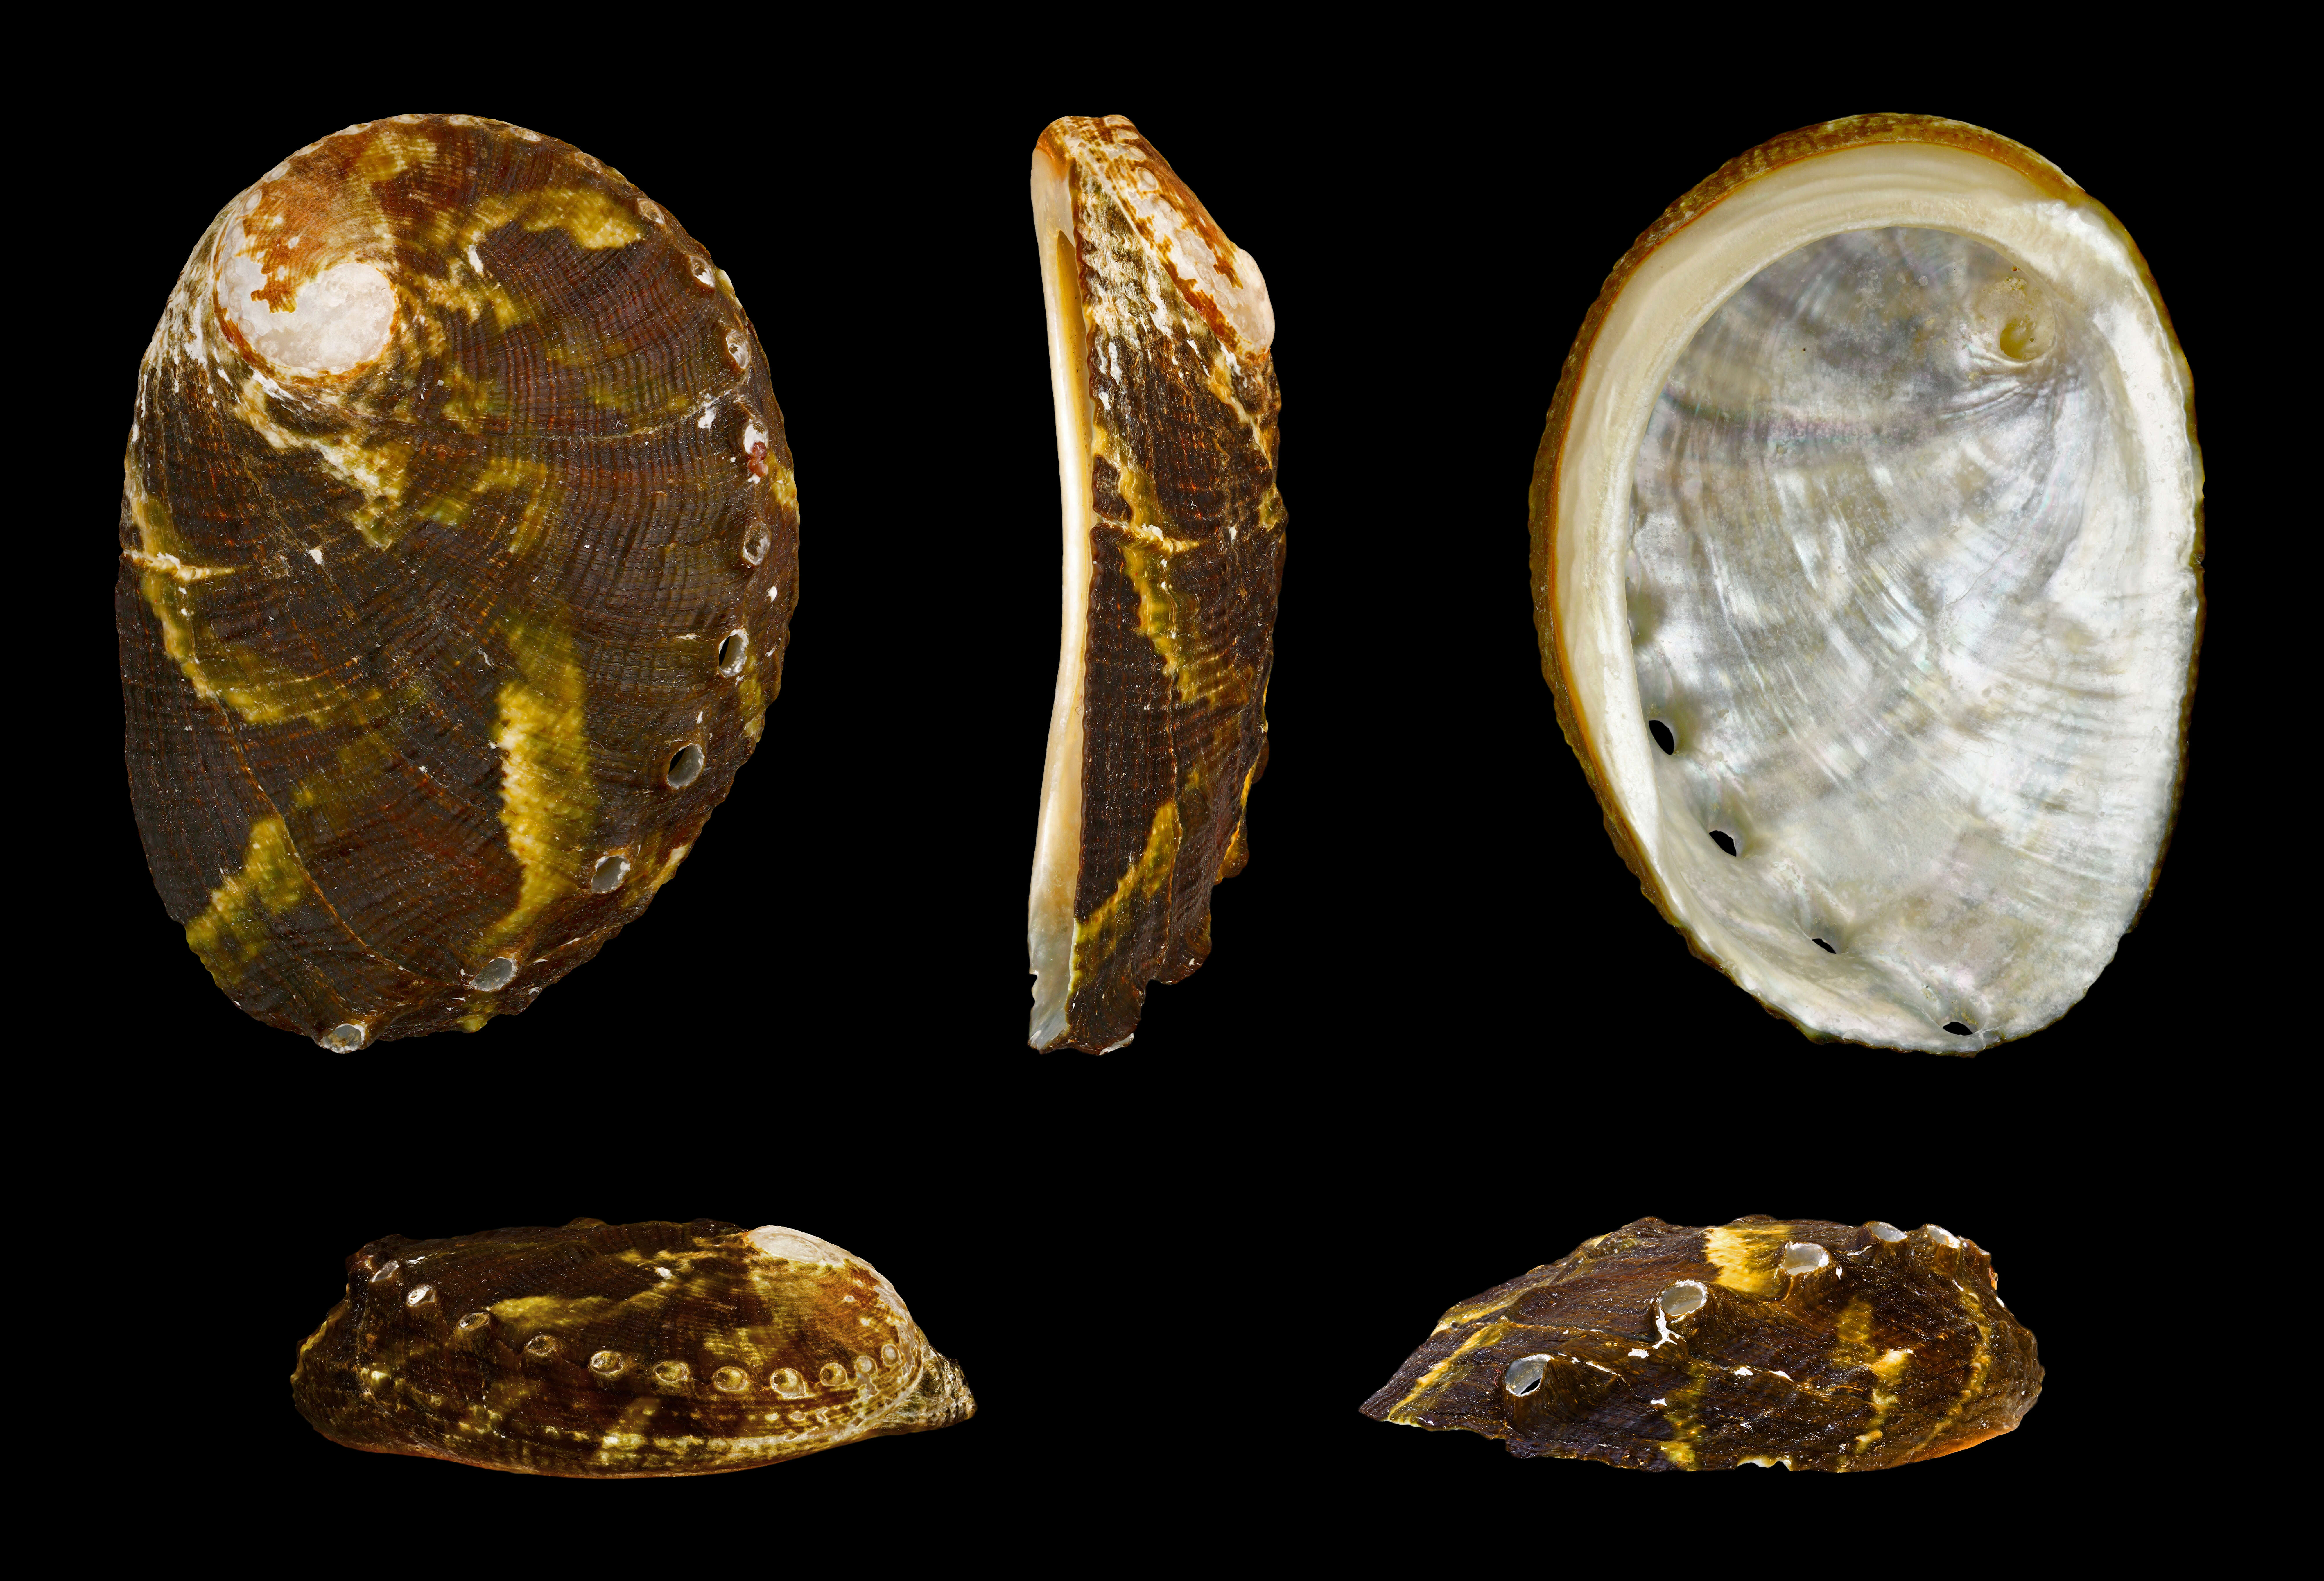 Image of variable abalone